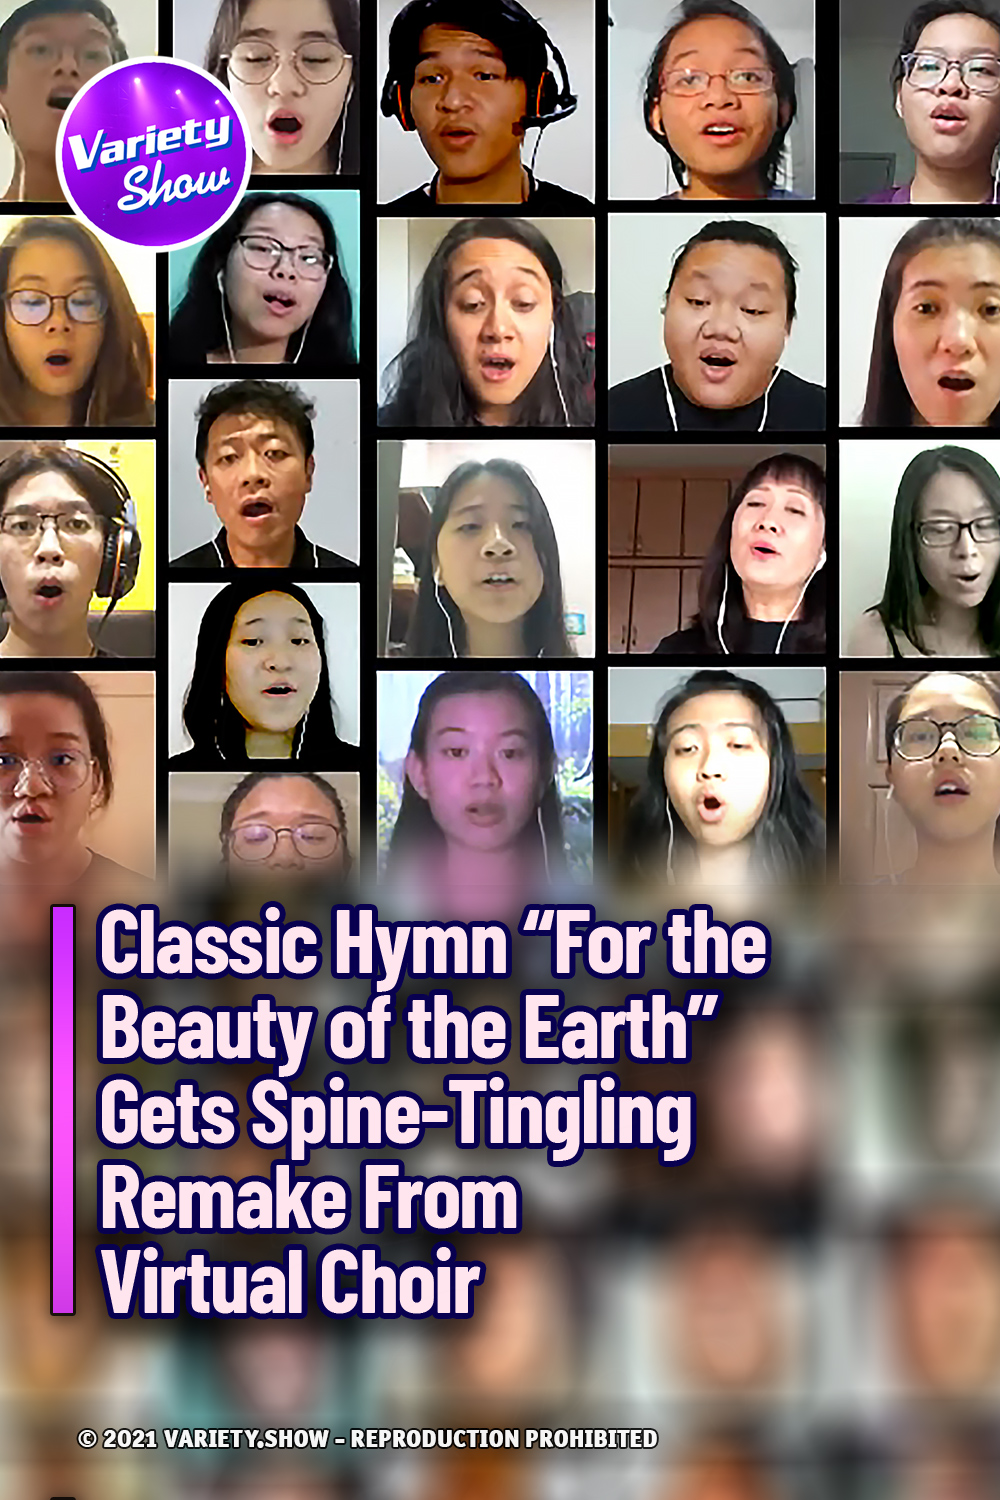 Classic Hymn “For the Beauty of the Earth” Gets Spine-Tingling Remake From Virtual Choir